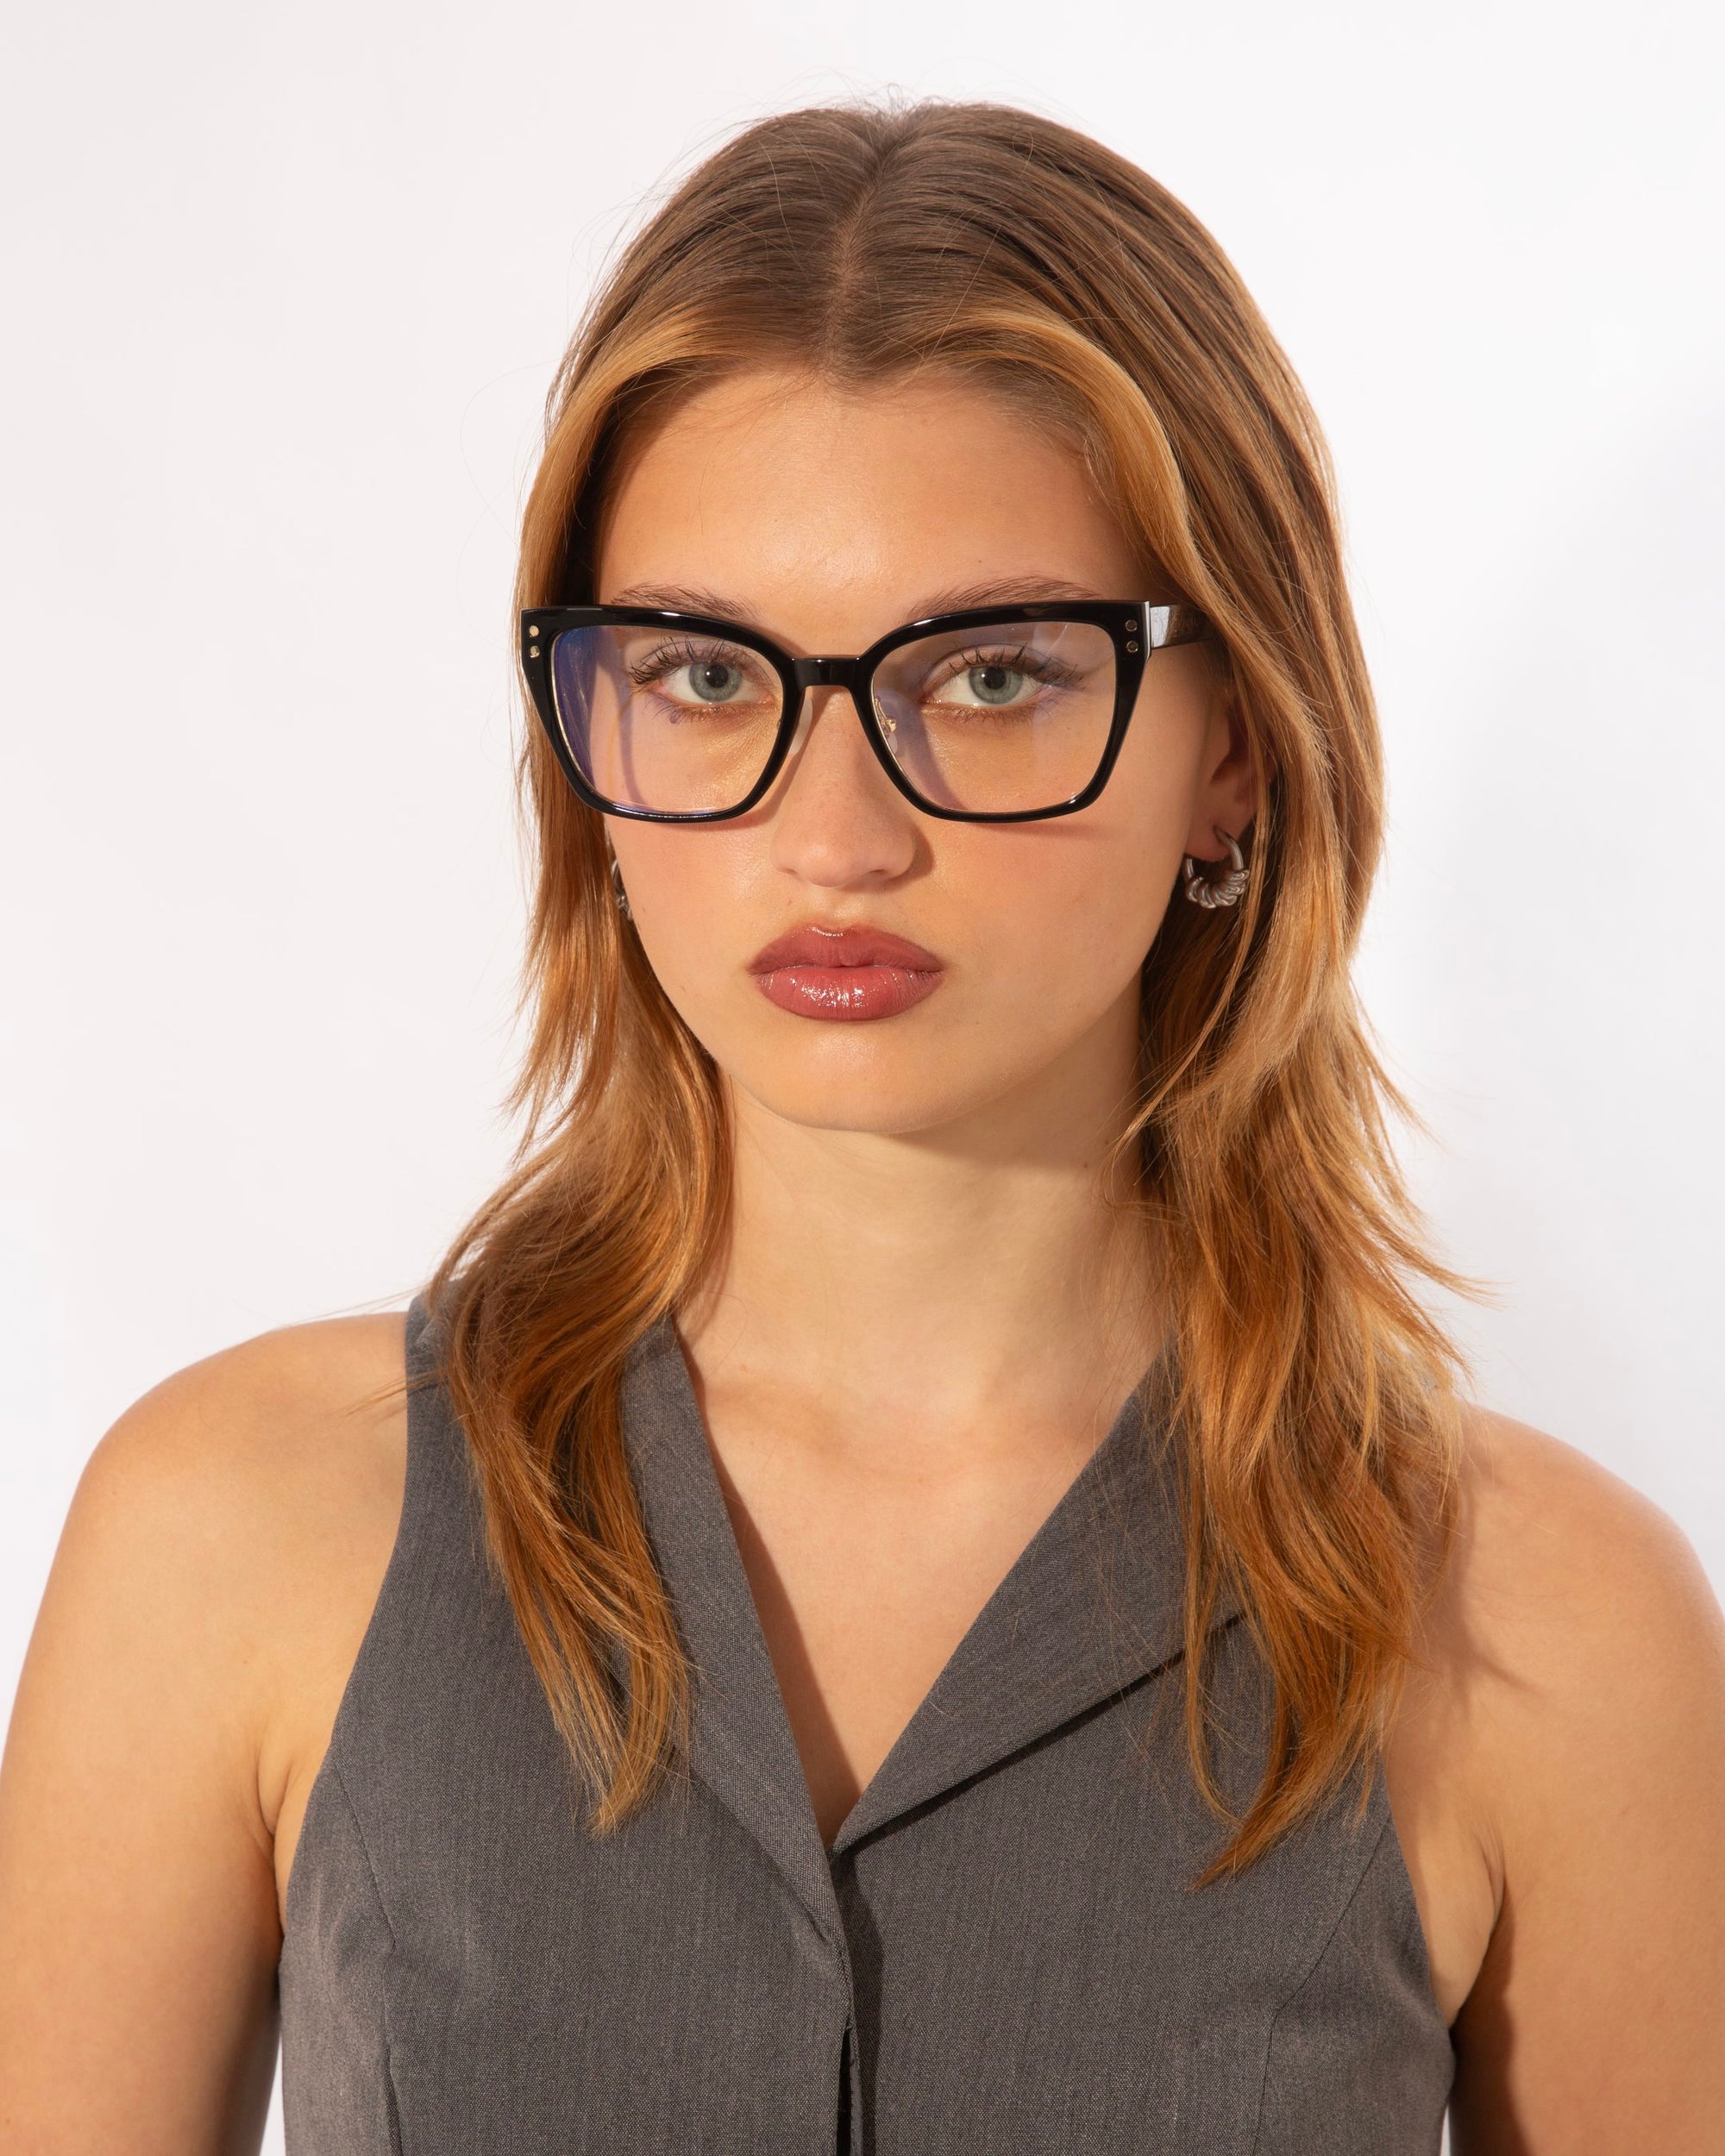 A person with long, light brown hair is wearing black-rimmed glasses and a gray sleeveless top. The Abbey by For Art&#39;s Sake® frames their neutral expression perfectly, set against a plain white background.